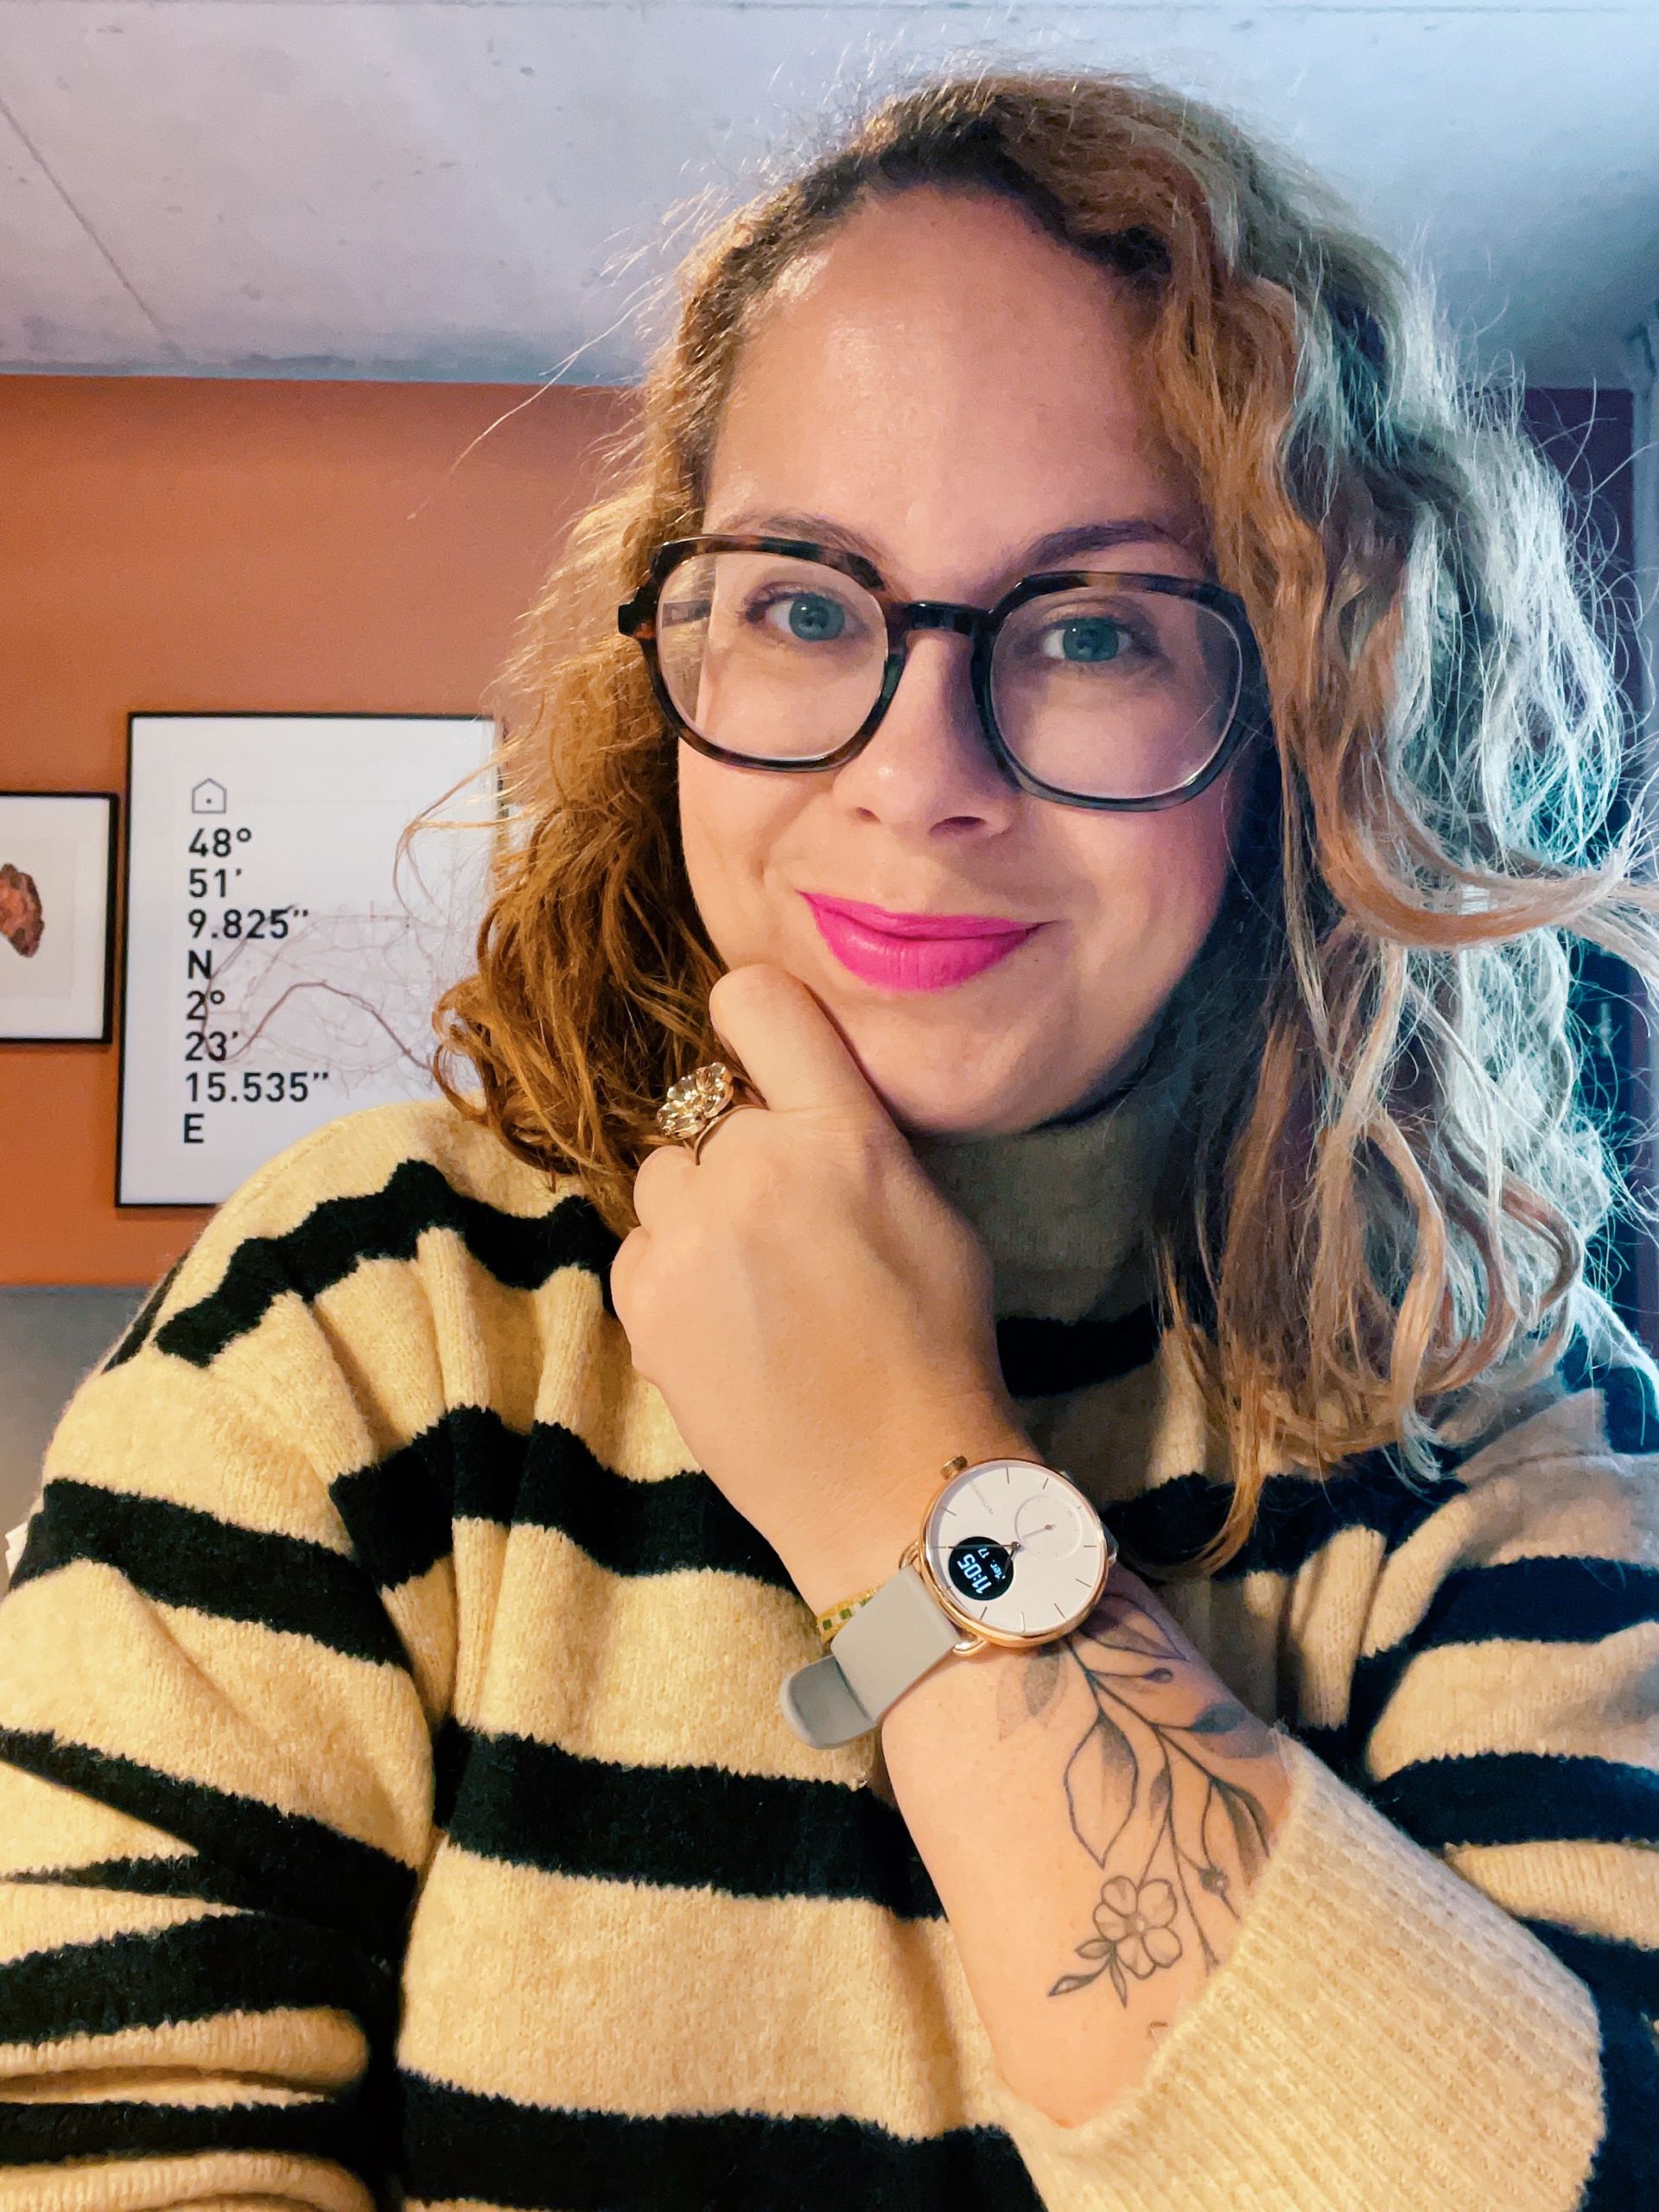 Test : La Montre WITHINGS Scanwatch - Le So Girly Blog